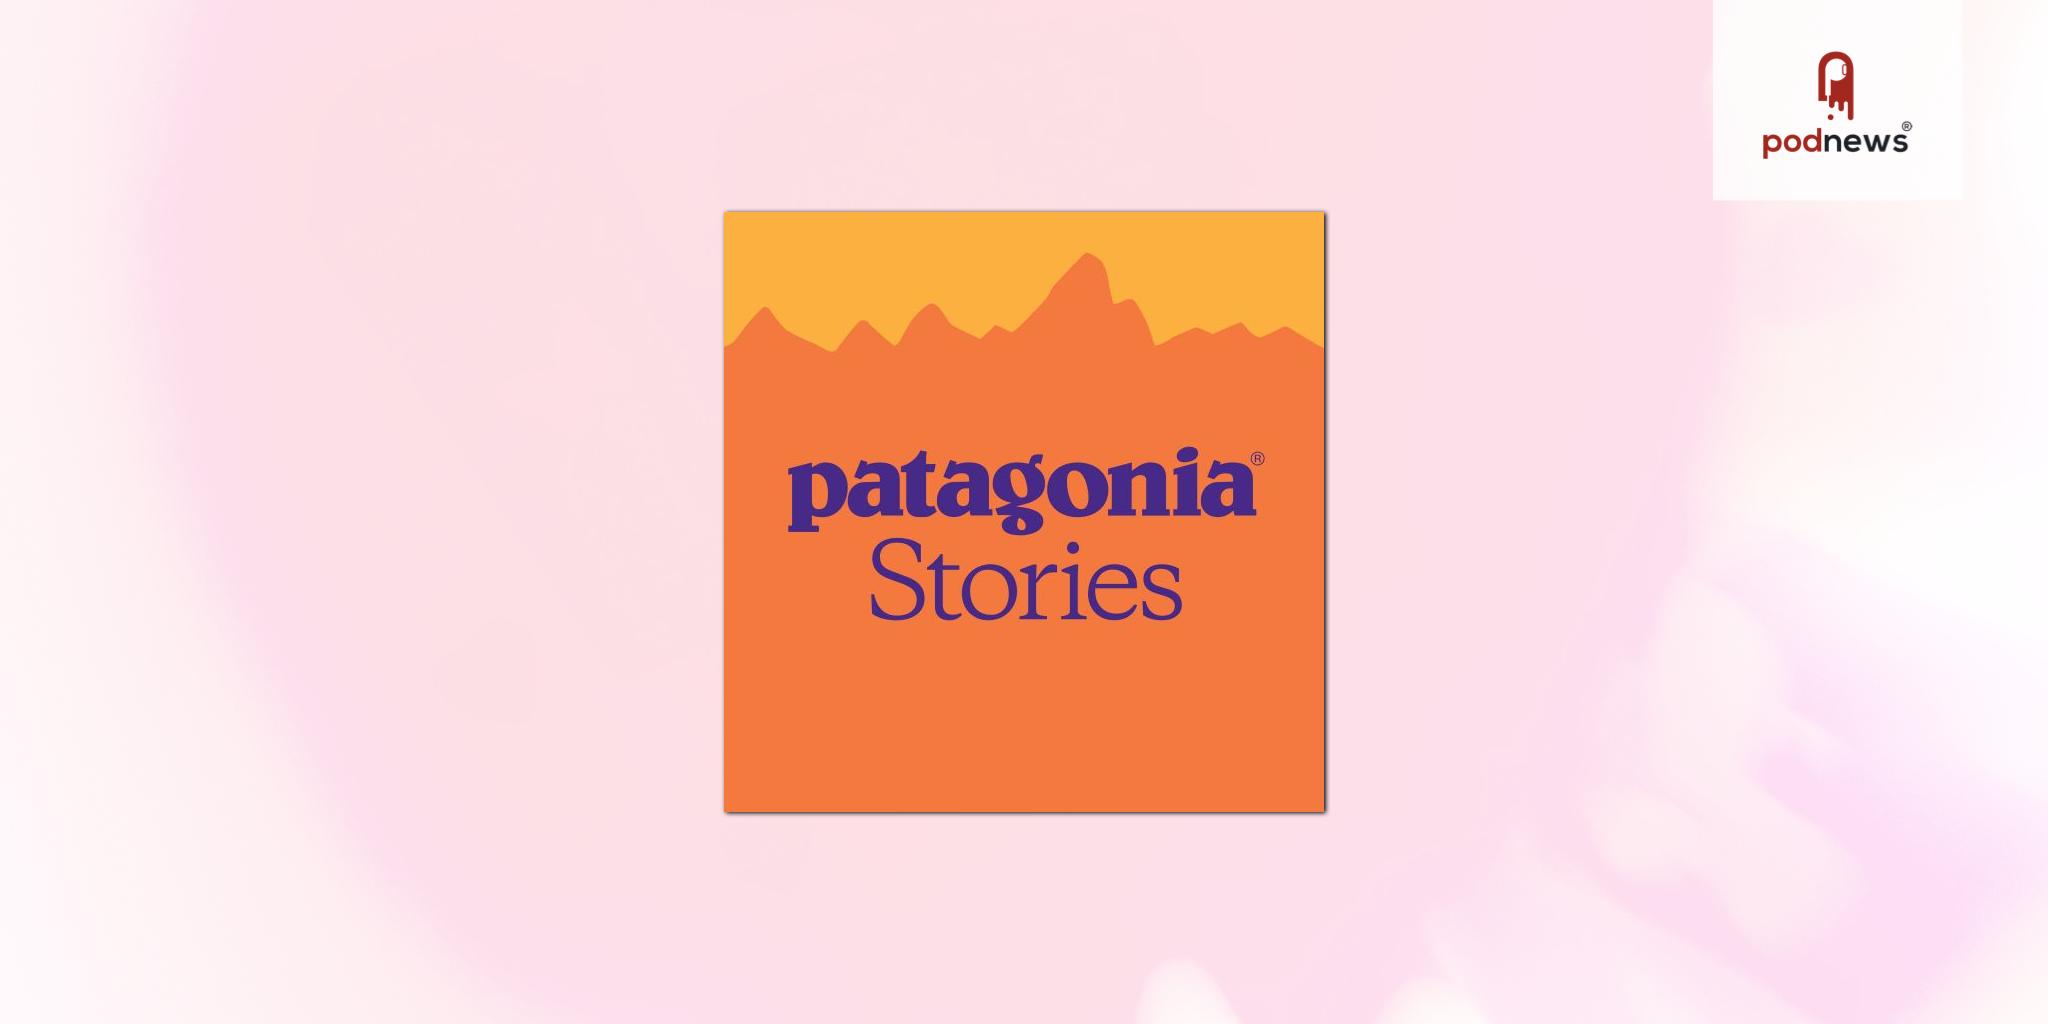 Patagonia and PRX announce Patagonia Stories, a new podcast series about sharing knowledge